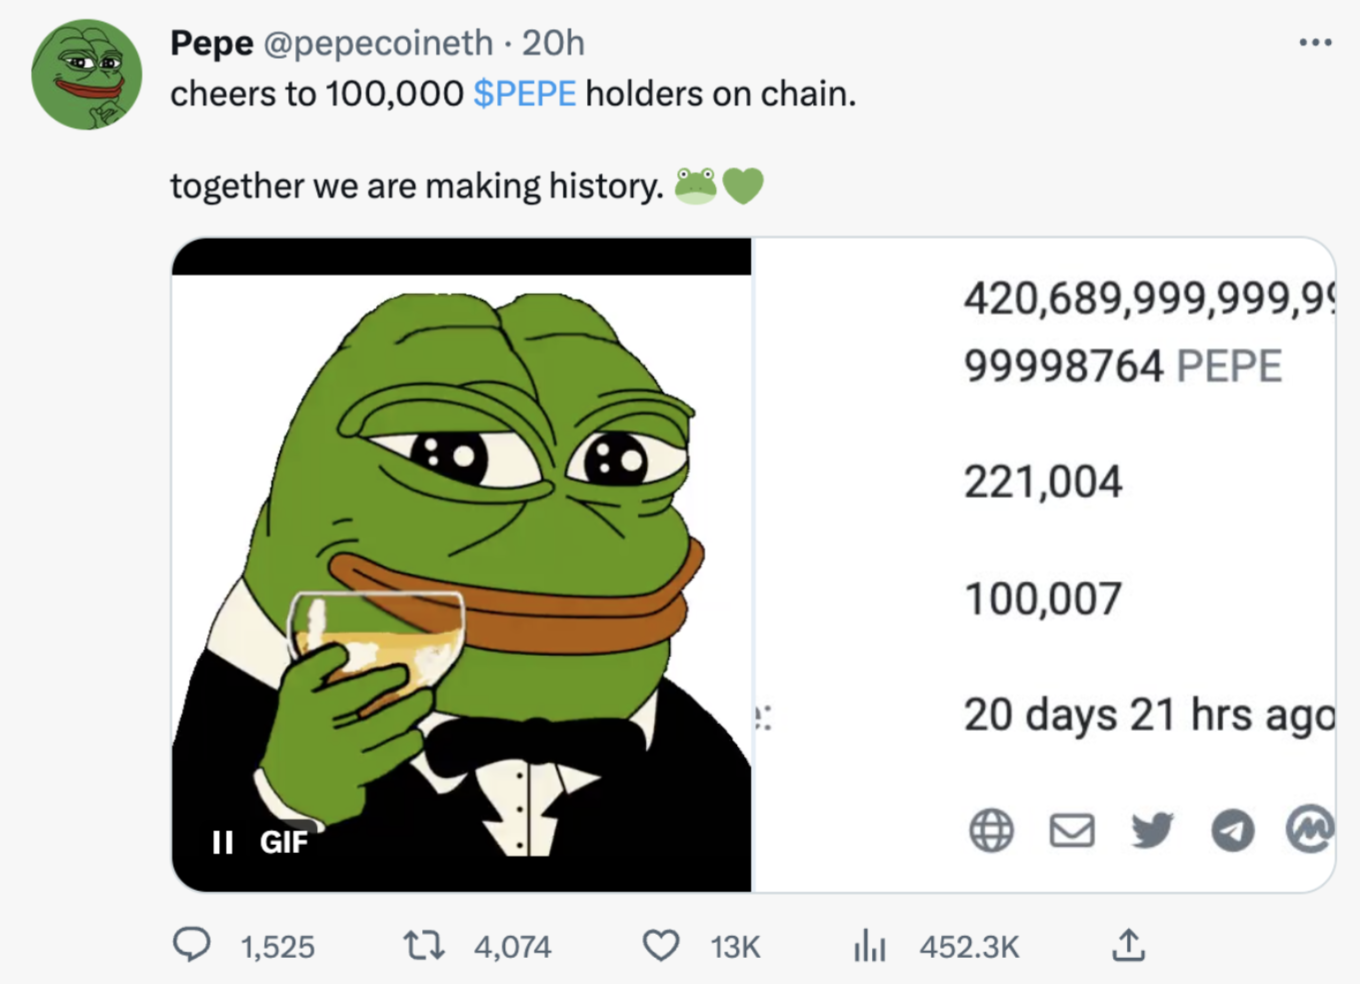 @pepecoineth tweet about $PEPE